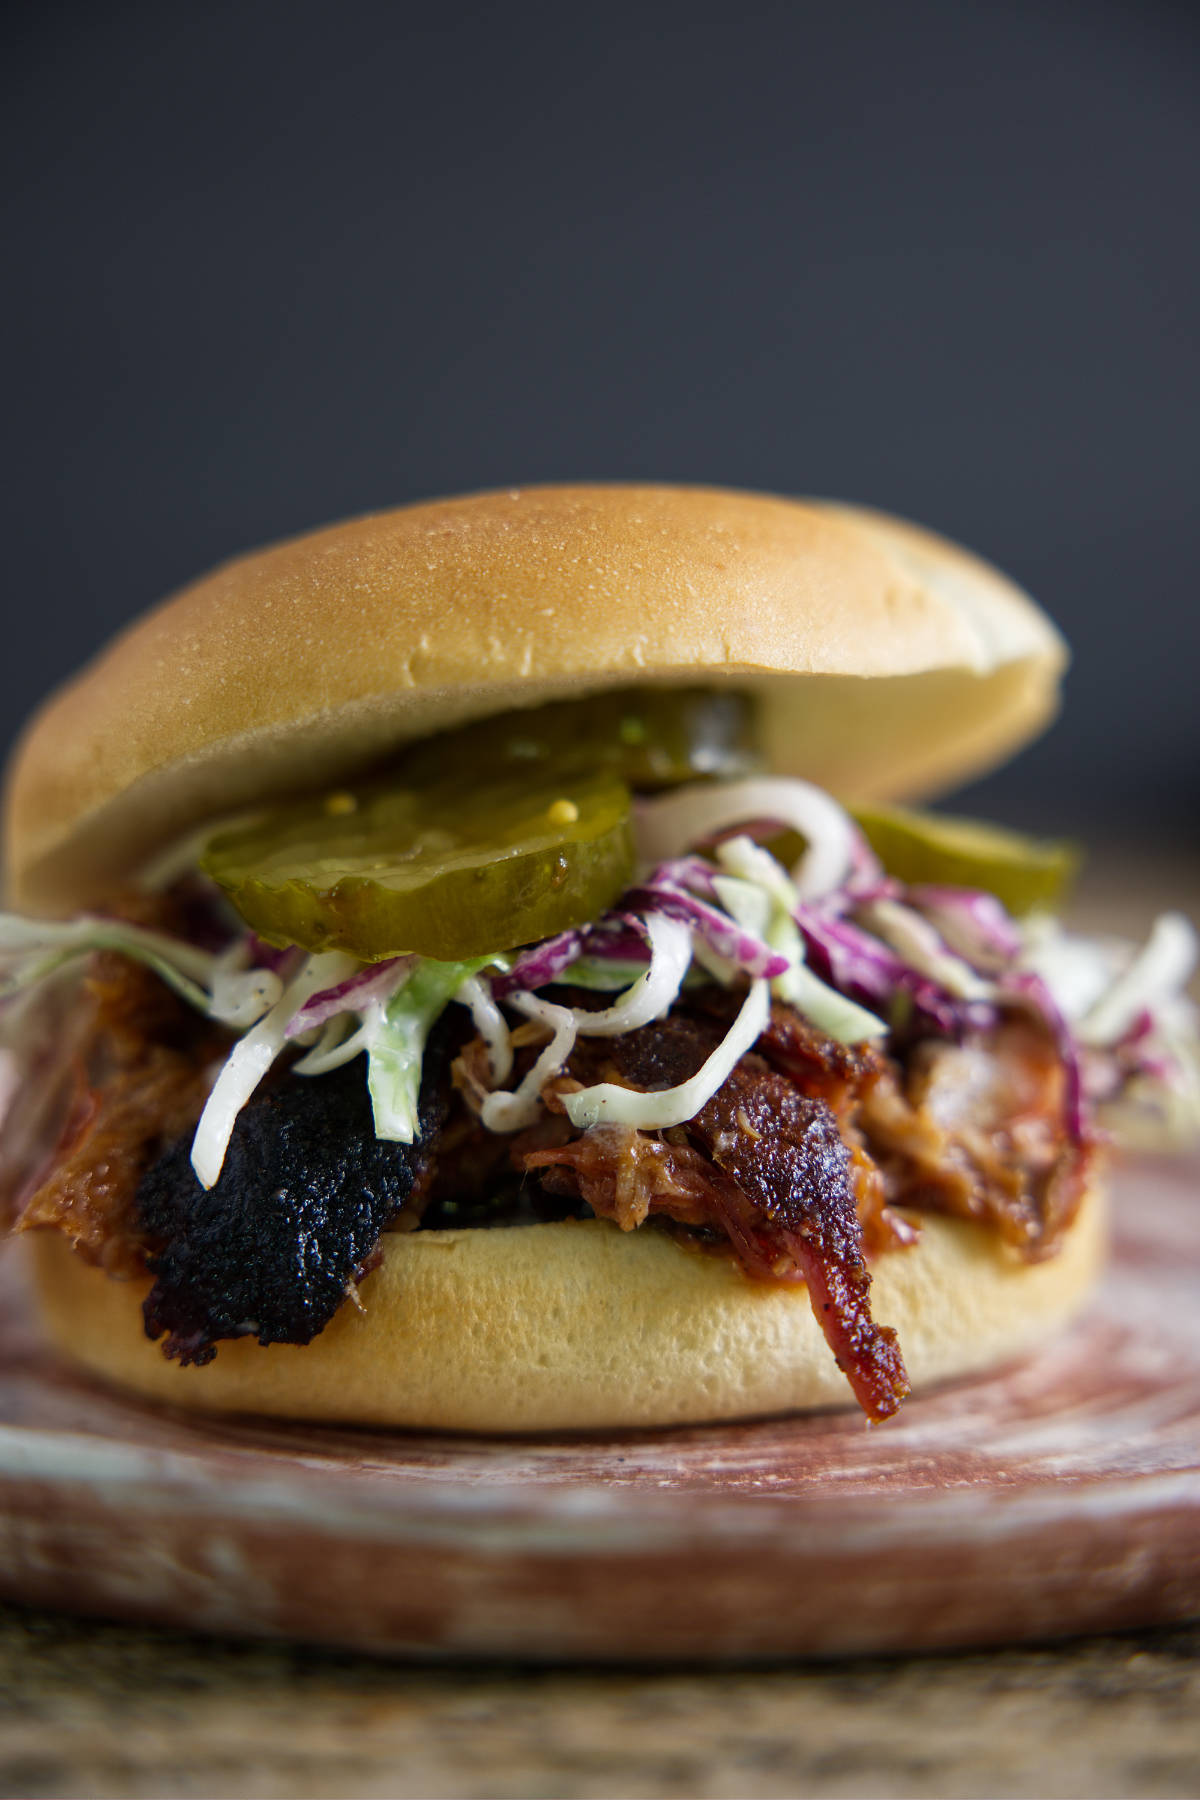 Pulled pork sandwich with slaw and pickles.